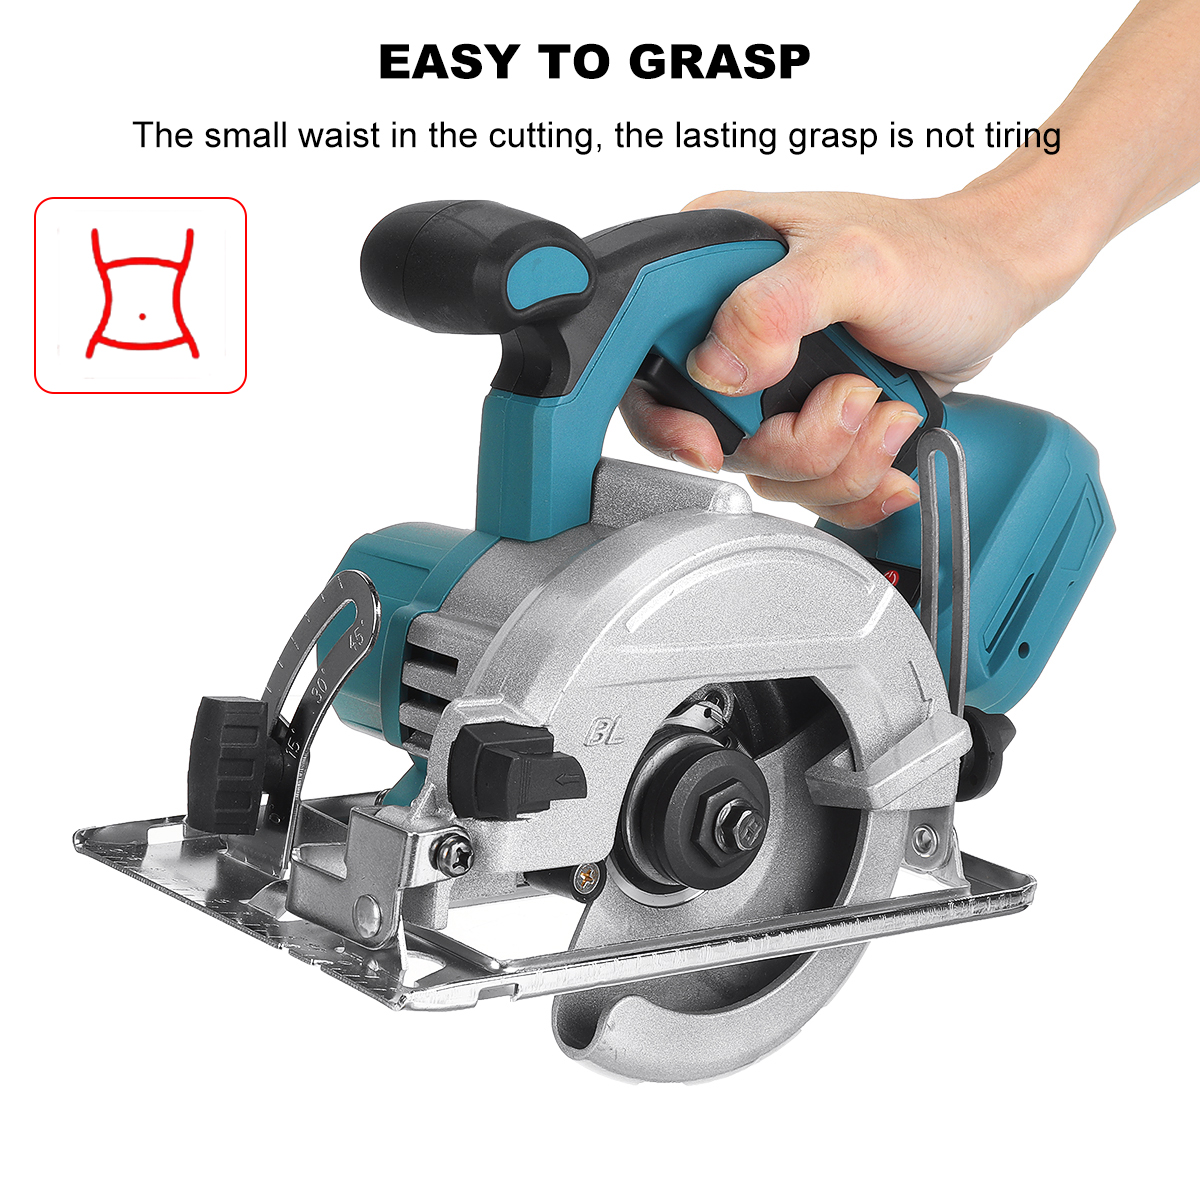 125mm-Wireless-Brushless-Electric-Circular-Saw-Rechargeable-Metal-Wood-Plastic-Stone-Cutting-Tool-fo-1880978-4